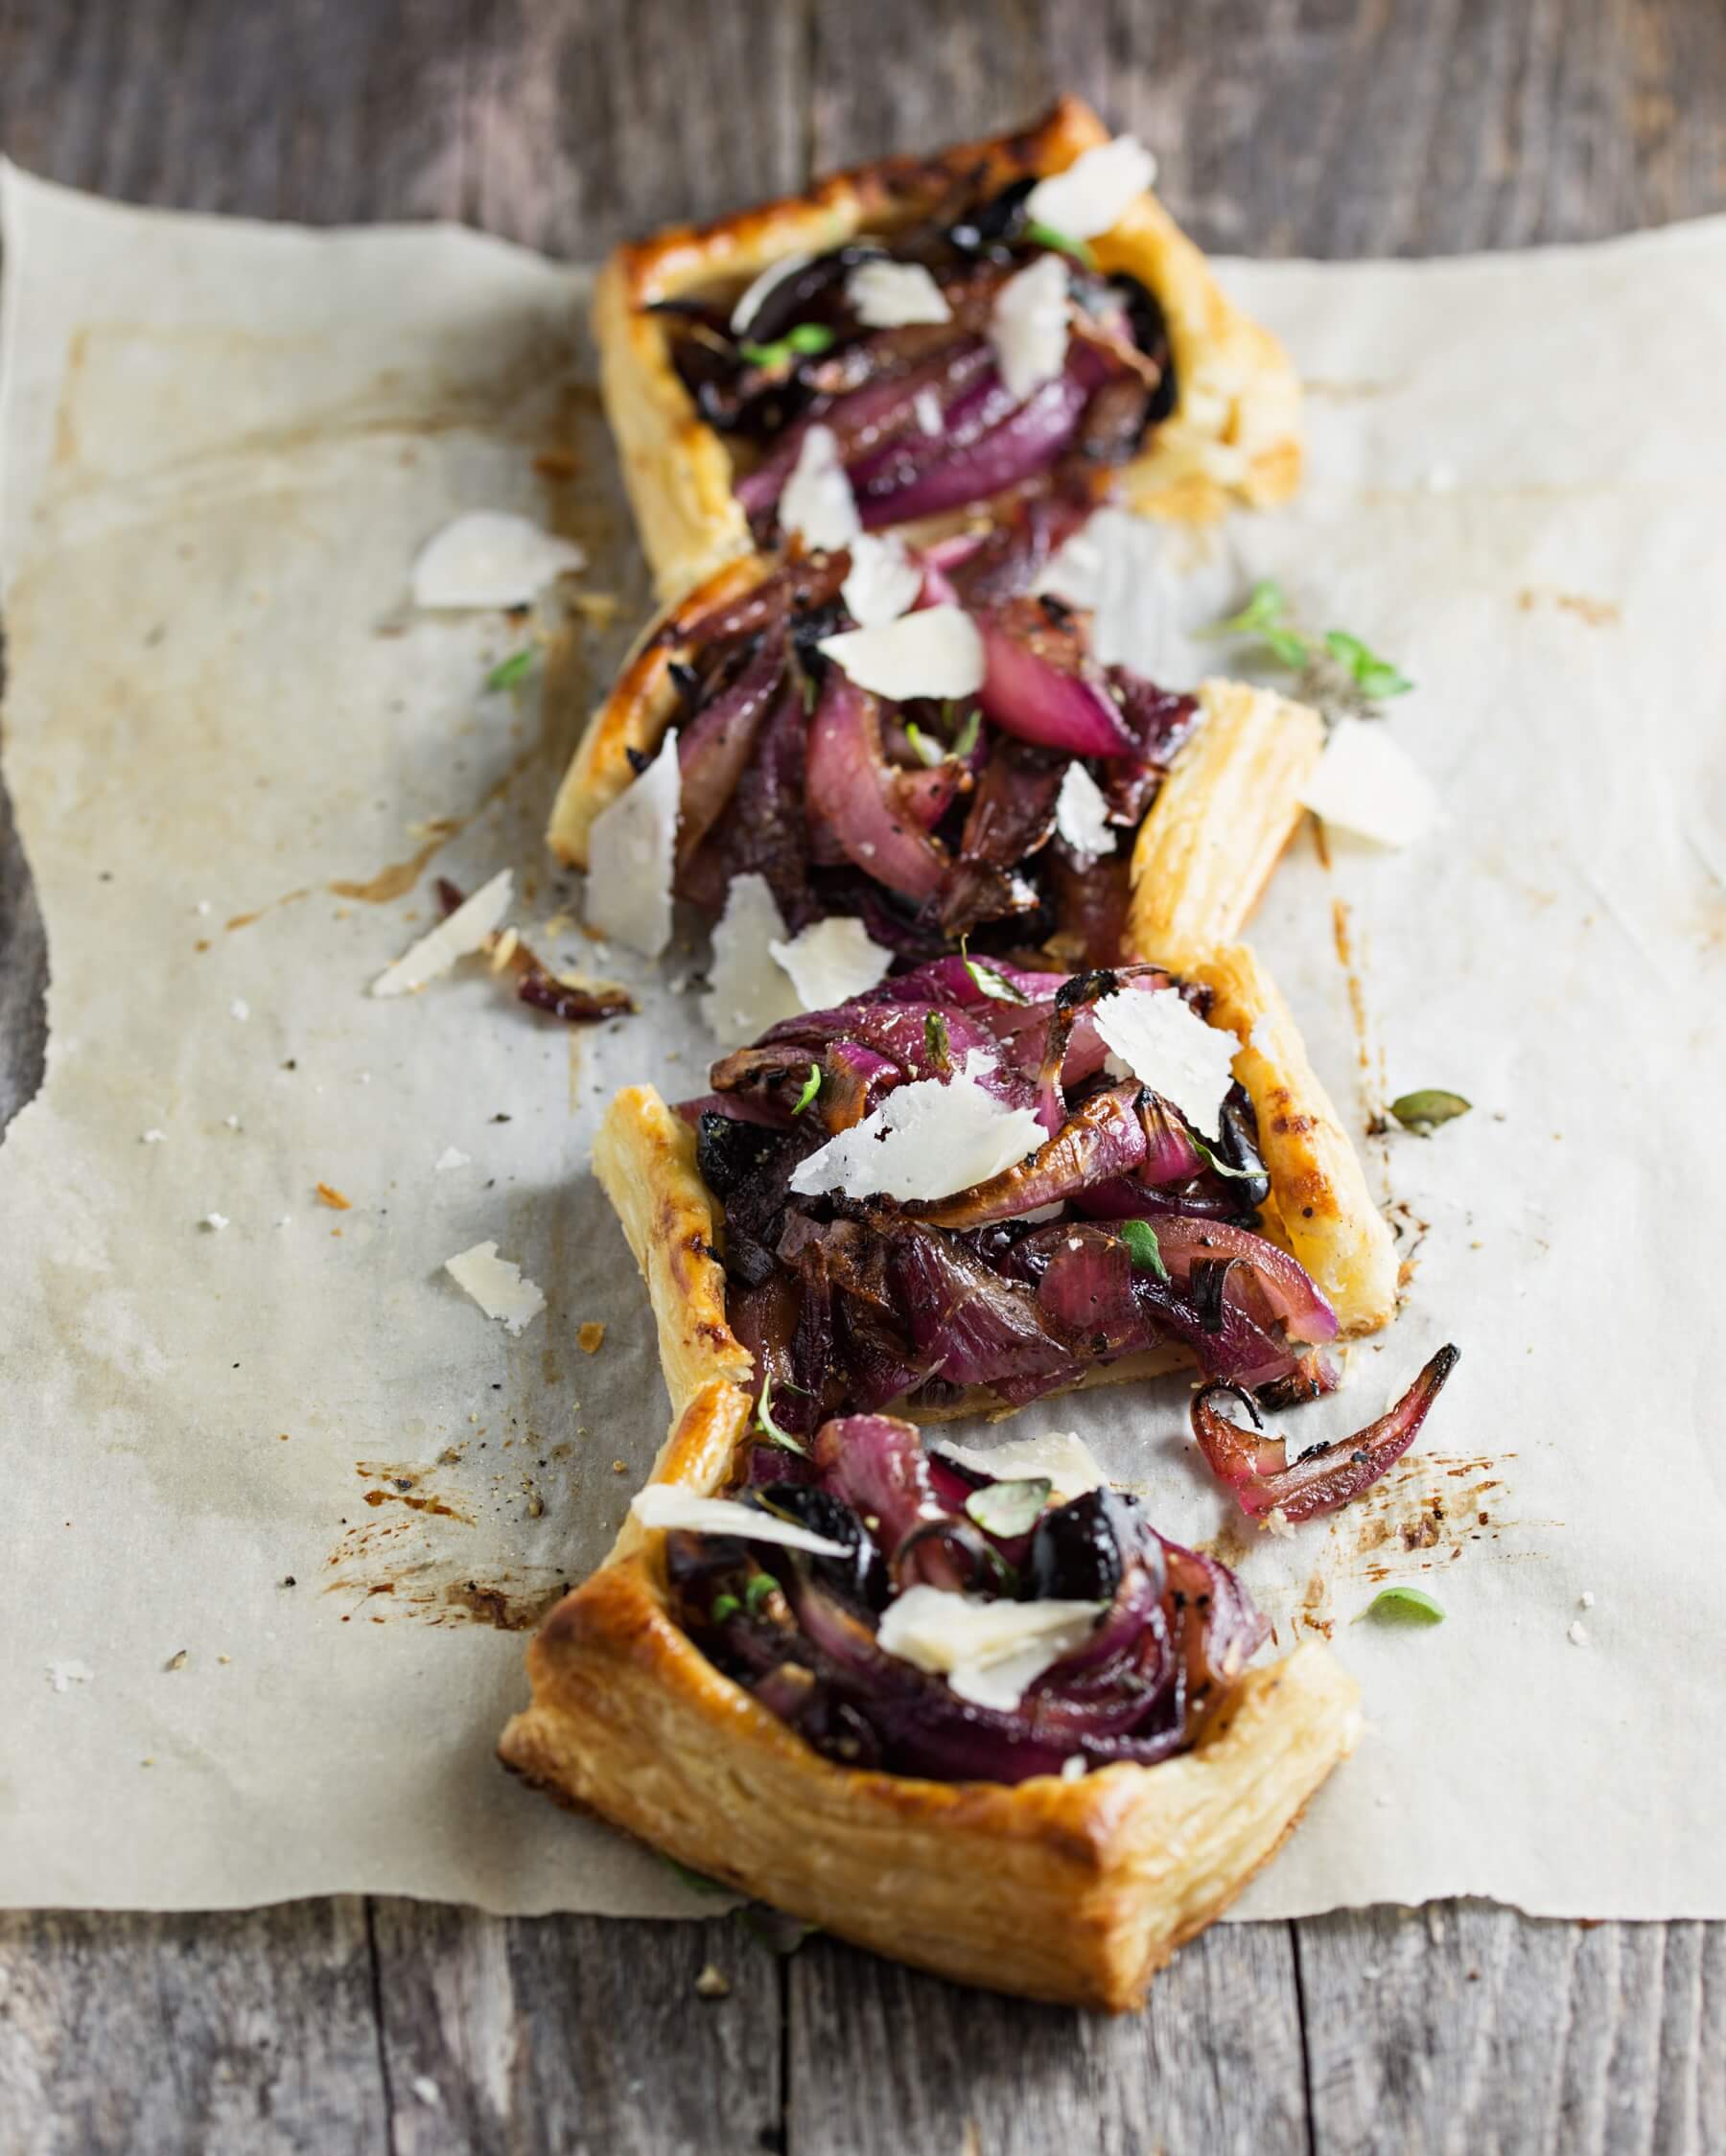 Cheddar and Red Onion Pastries Recipe